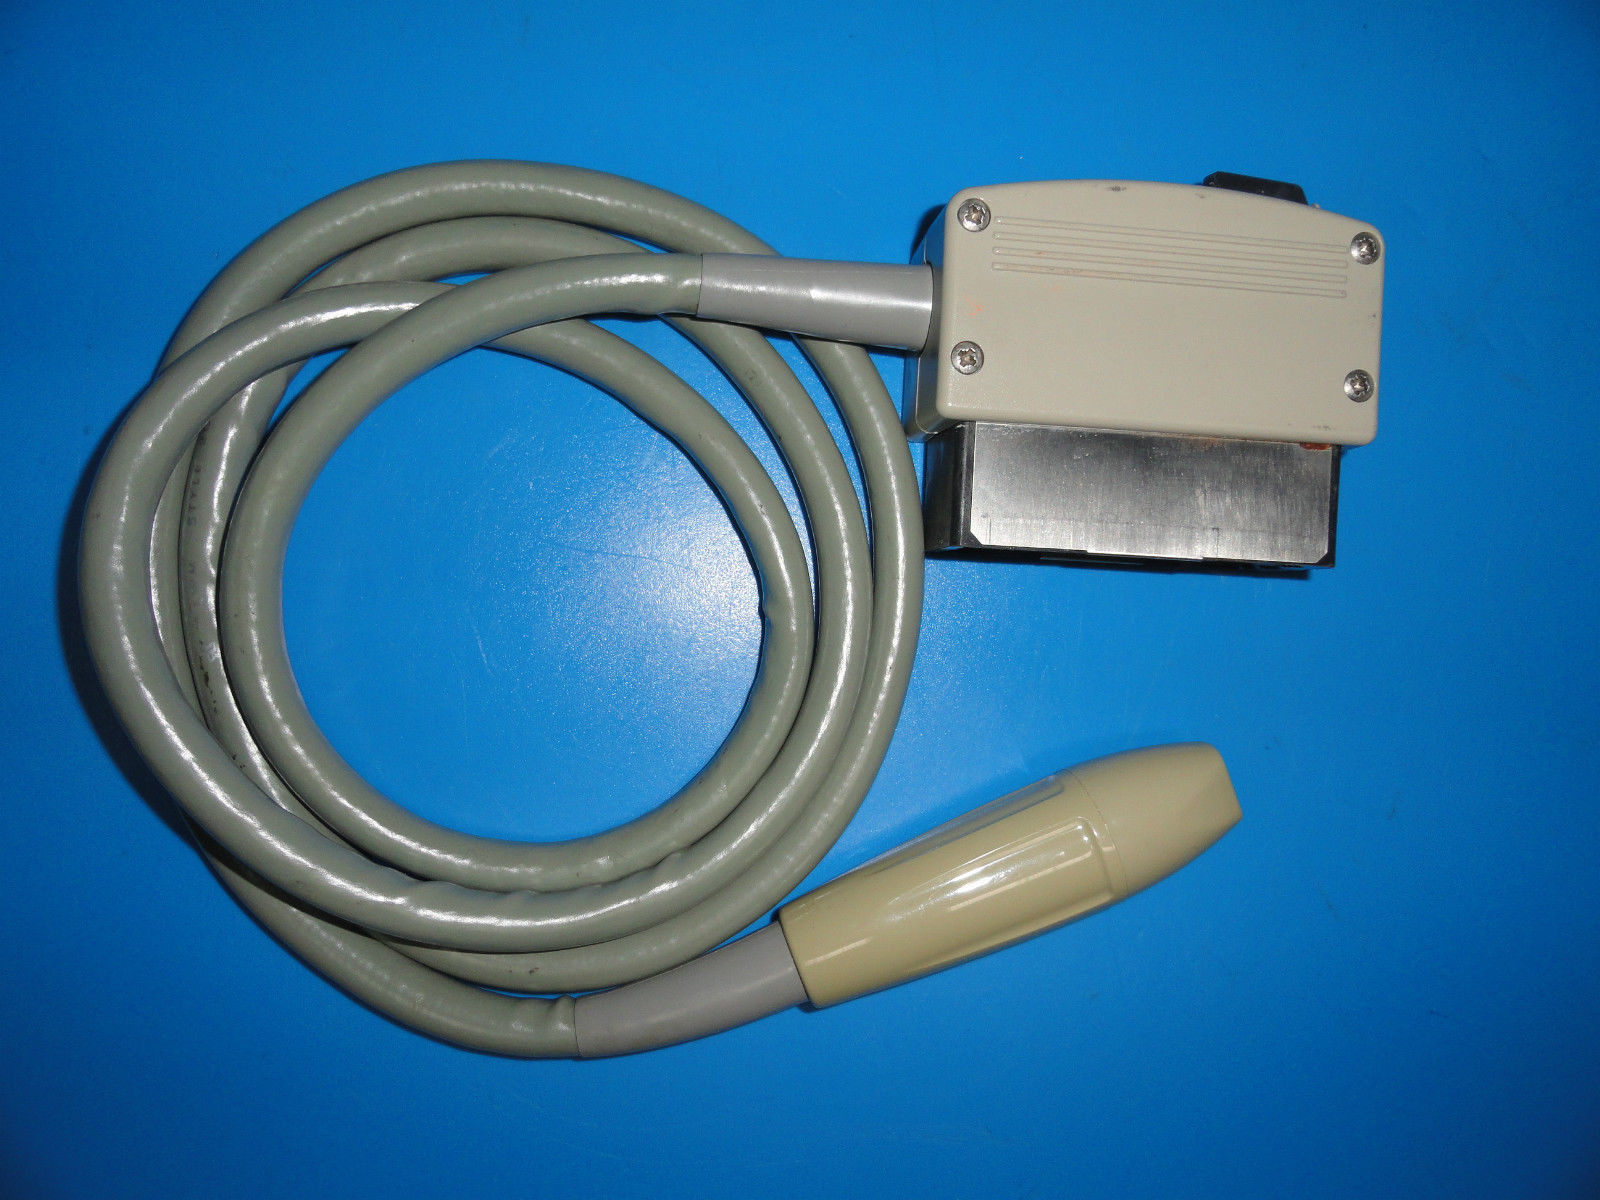 HP 21211A Phased Array 5.0 MHz Cardic Ultrasound Transducer for Sonos 500 (3515)